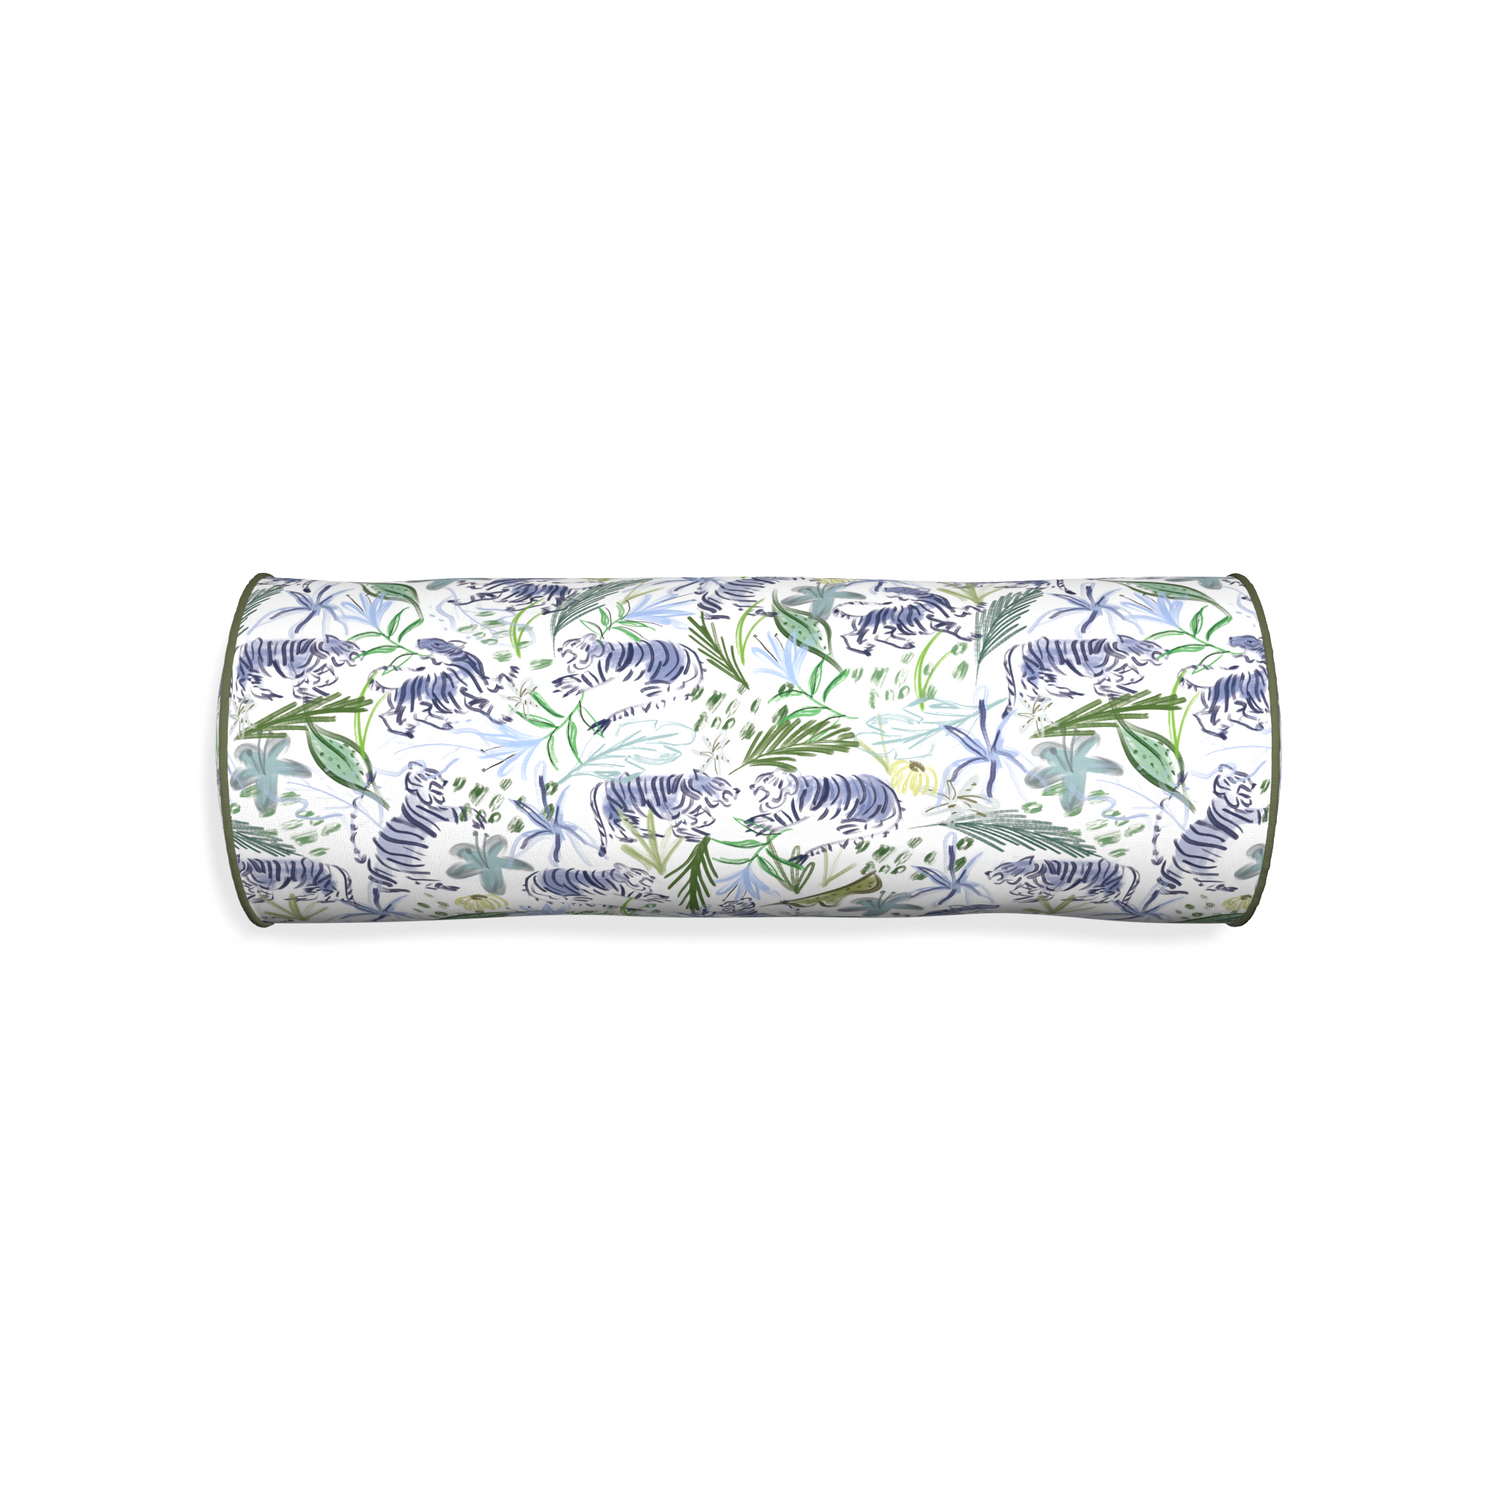 Bolster frida green custom pillow with f piping on white background